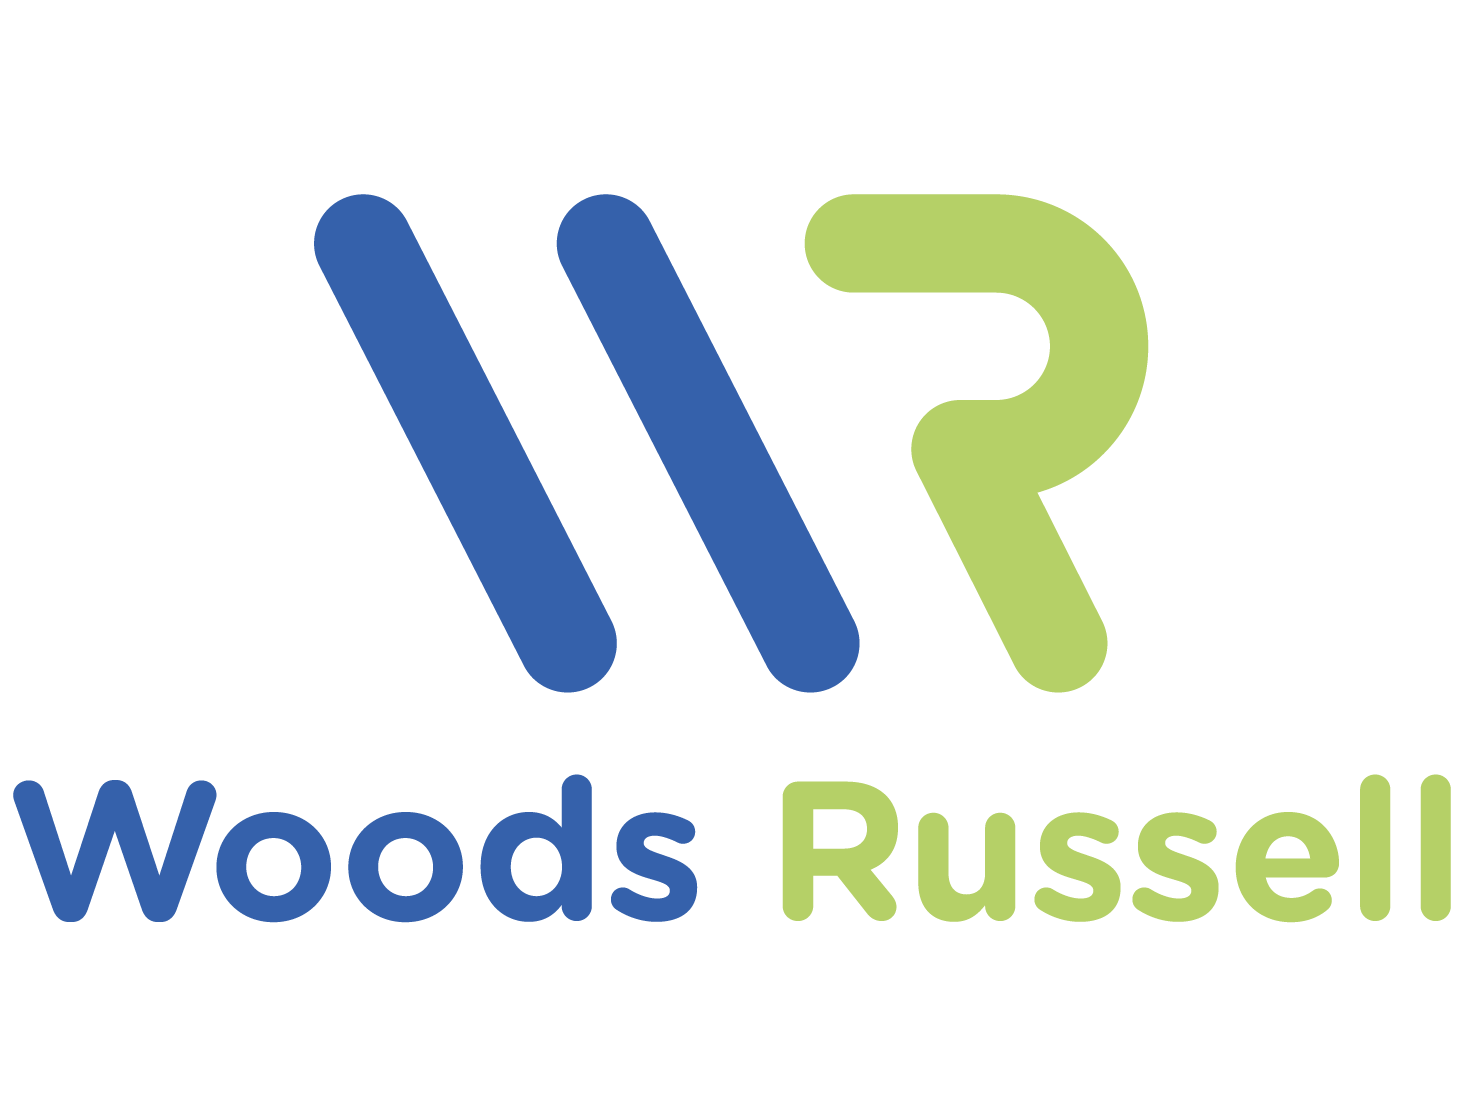 Woods Russell